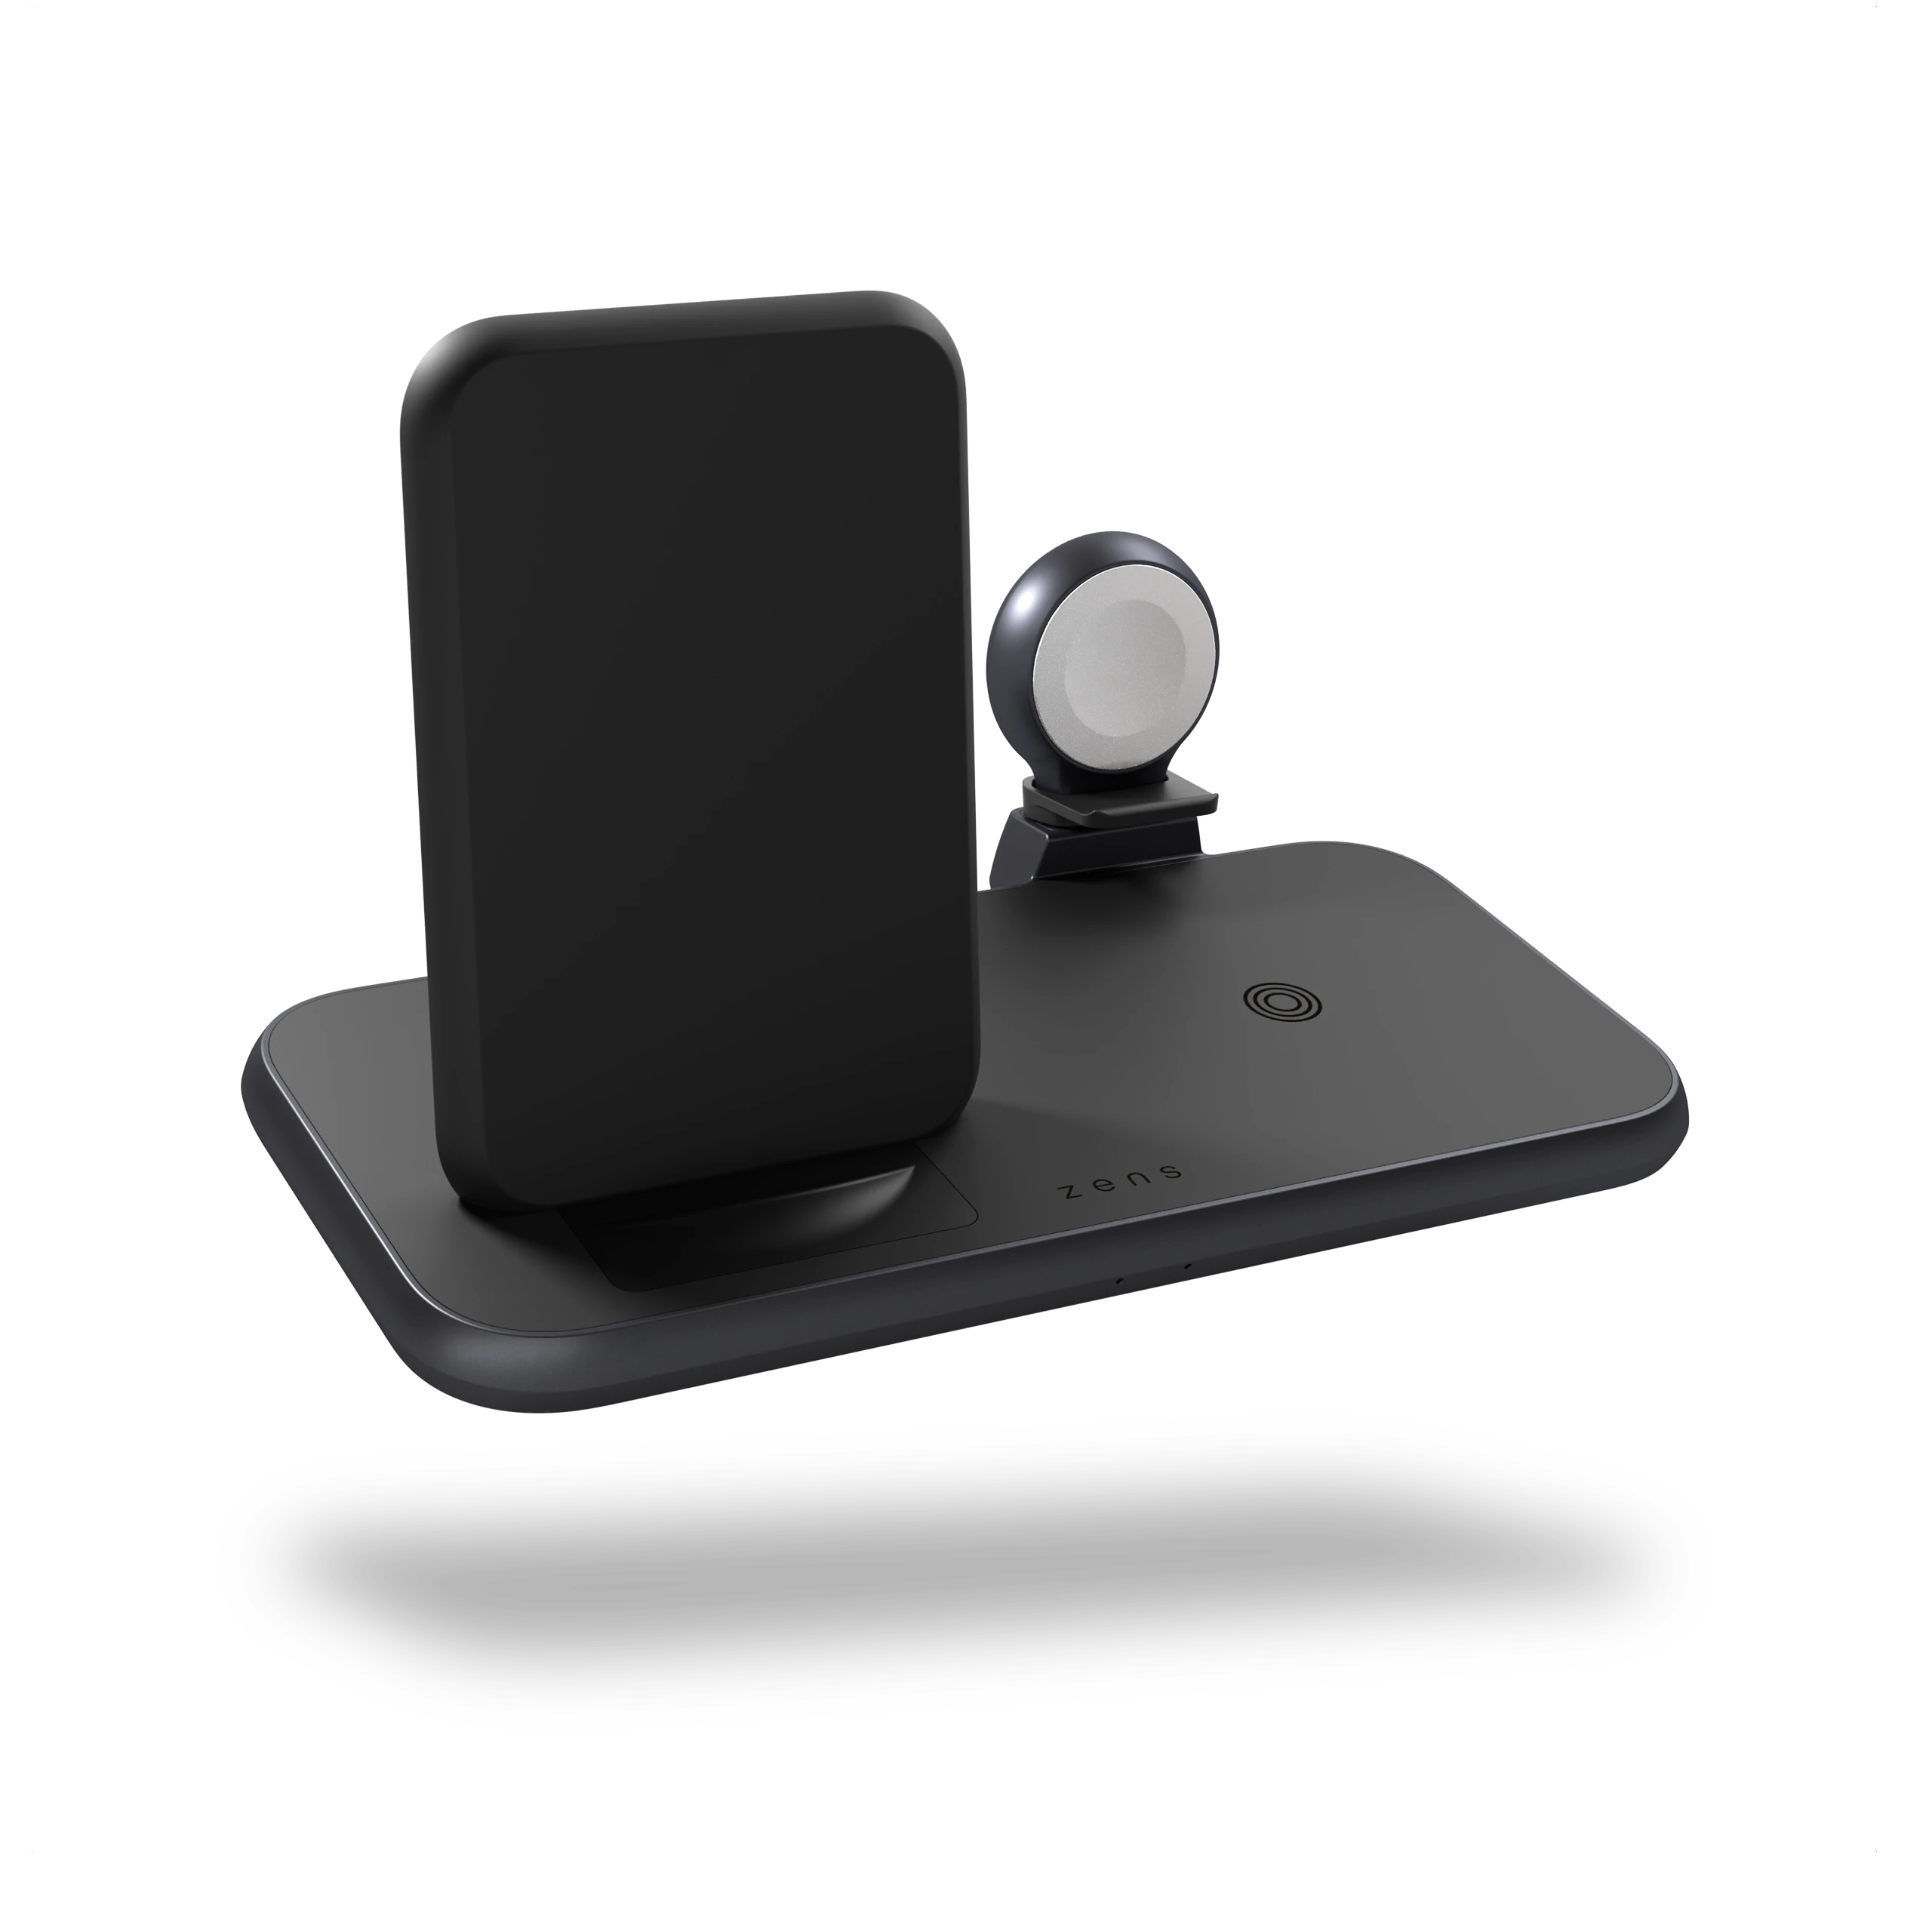 Zens Stand + Watch 4 in 1 Aluminium Wireless Charger Black with 45W USB-C PD Wall Charger (ZEDC15B/00)